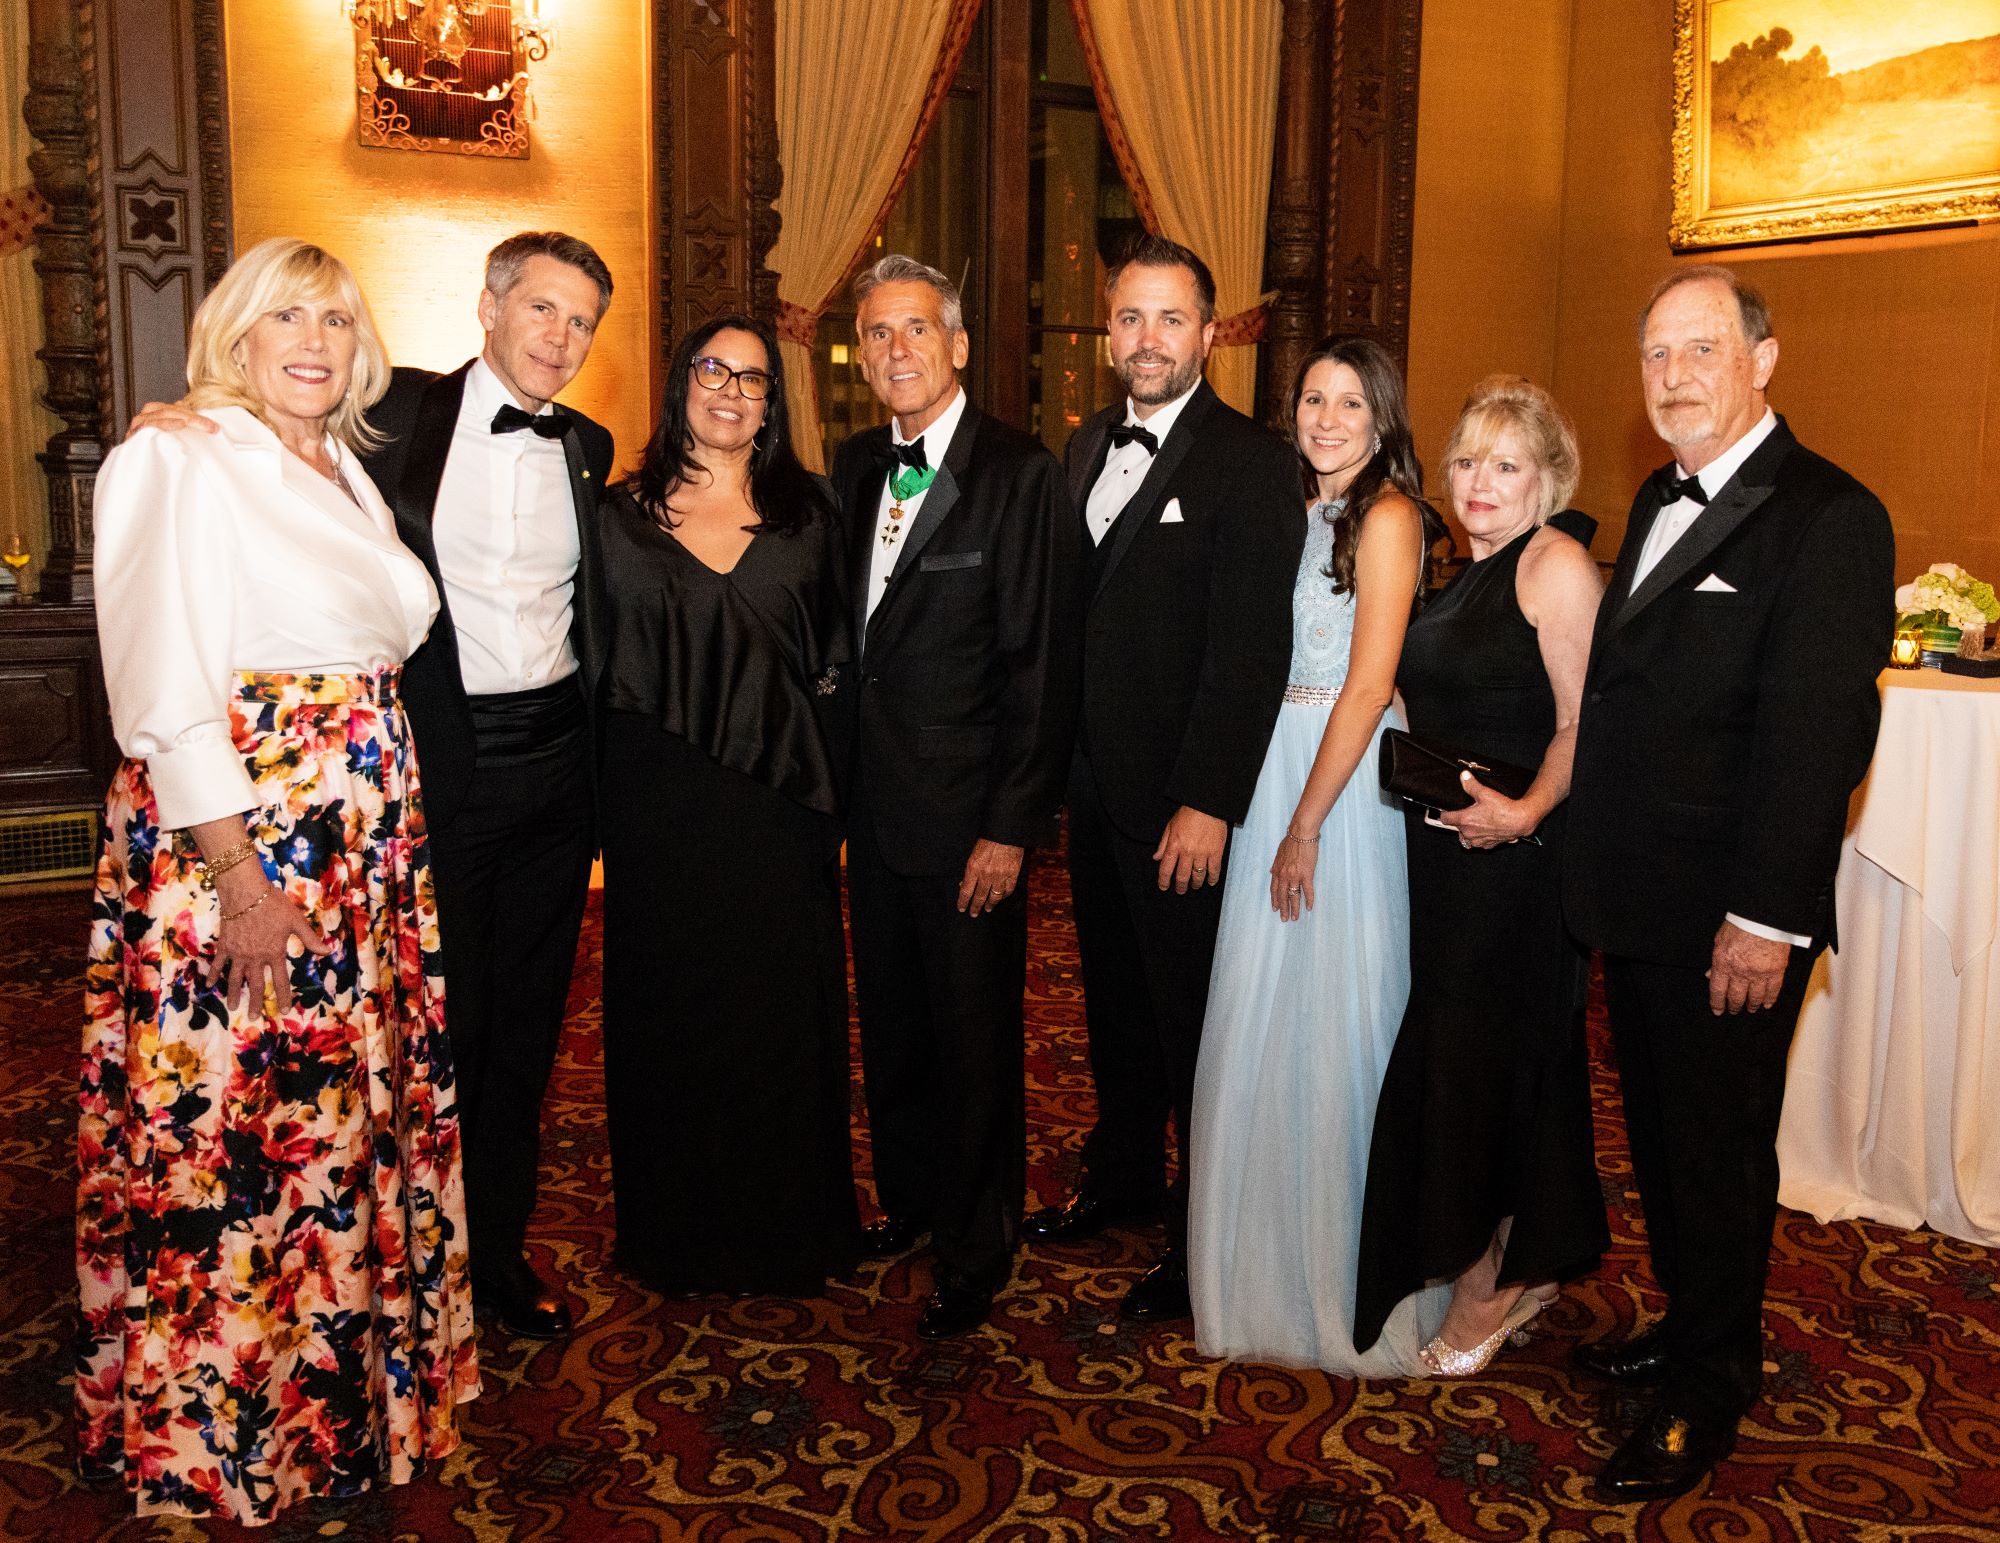 Christy Albeck (left) with HRH Prince Emmanuel Philibert of Savoy and Event Chair Daniel J. McClory and guests, Fifth Annual Notte di Savoia Los Angeles, April 29, 2023